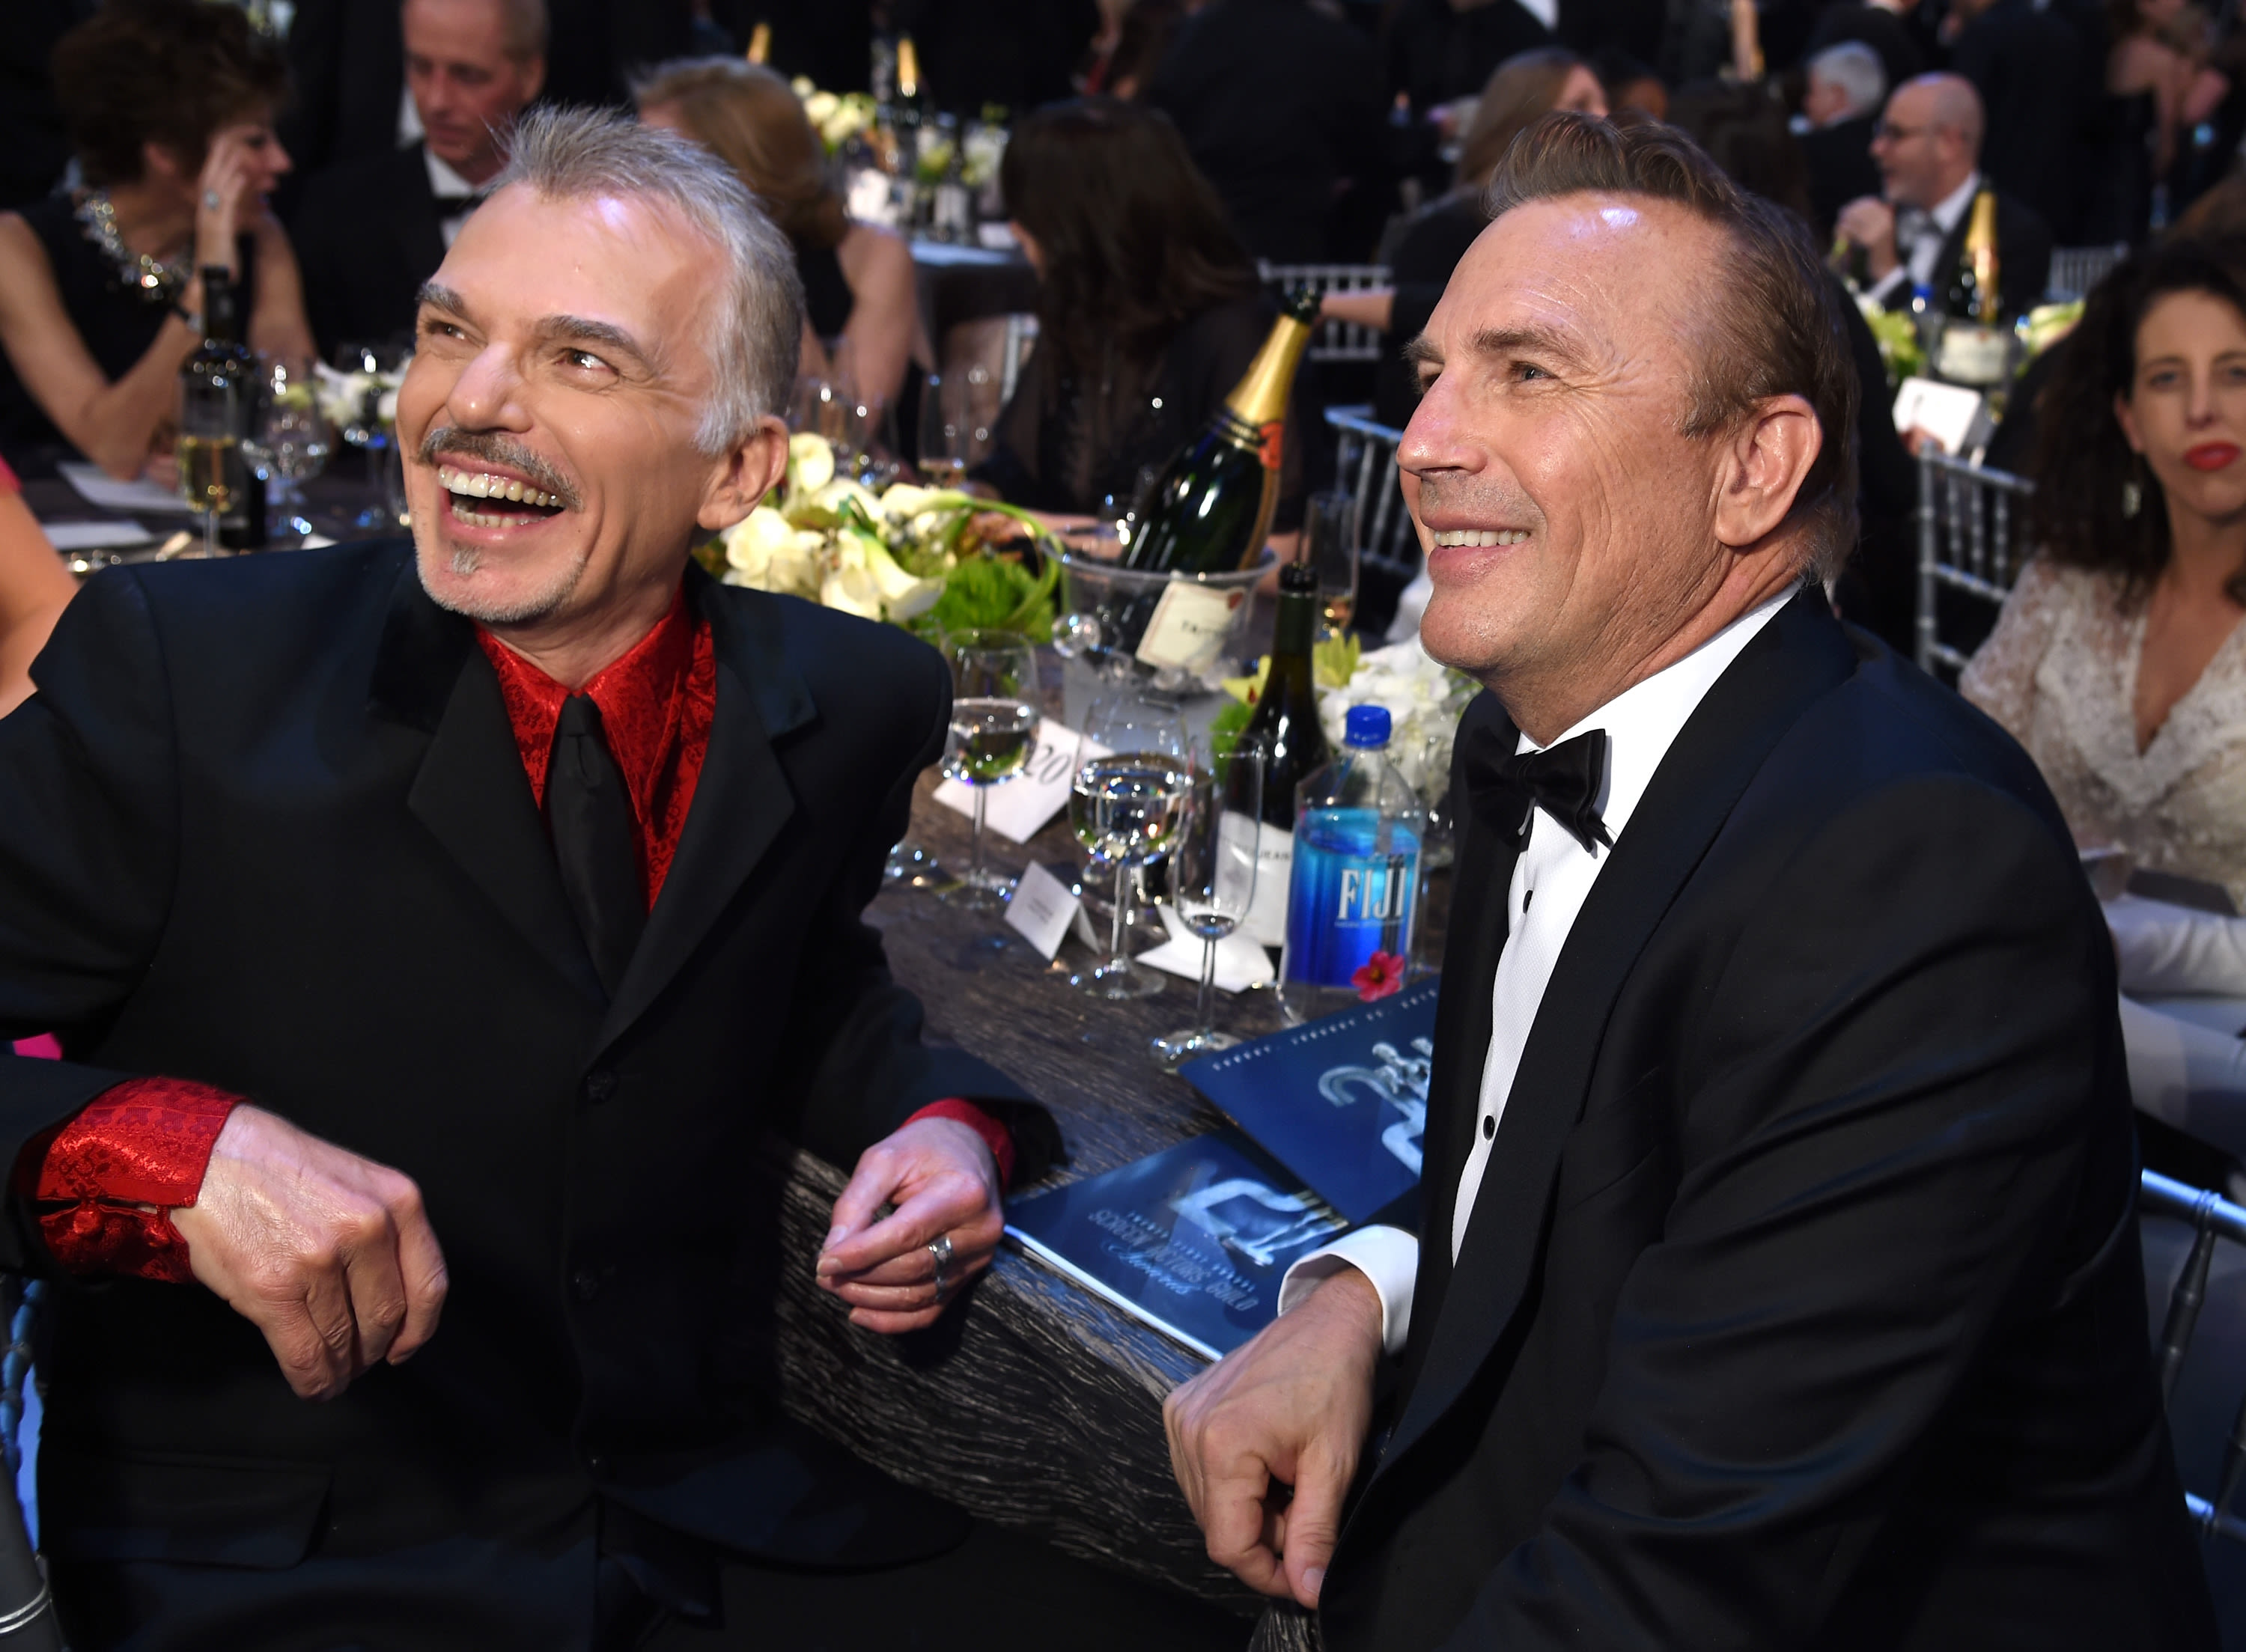 Kevin Costner Leaning on Longtime Friend Billy Bob Thornton as He Adapts to Post-Divorce Life